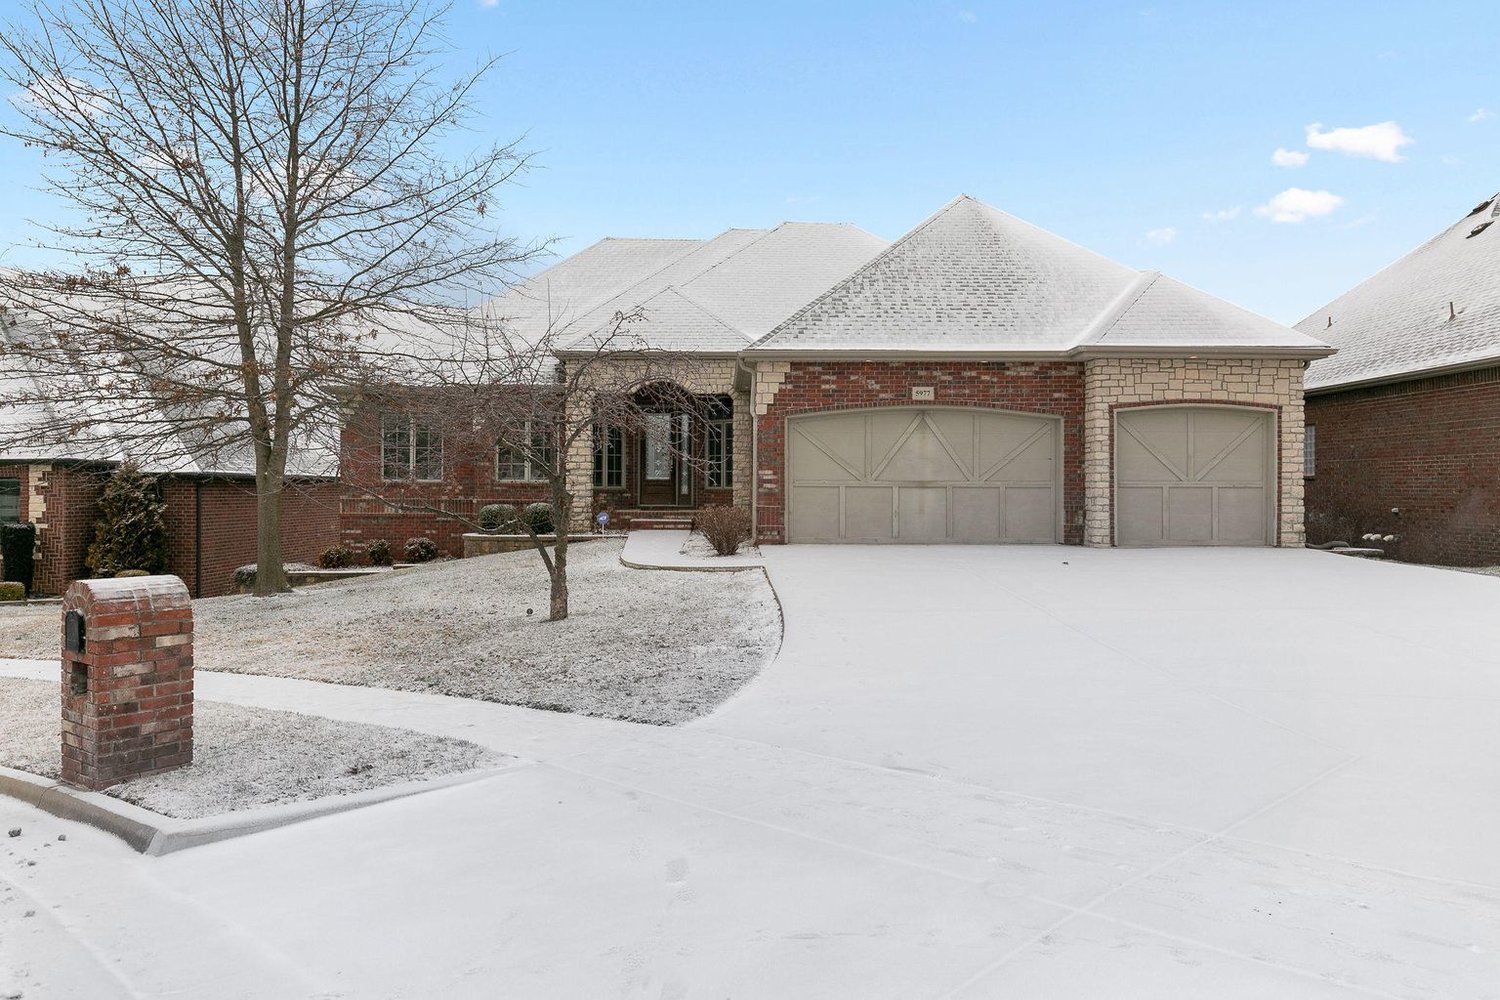 5977 Lakepoint Drive
$500,000
Bedrooms: 5
Bathrooms: 4.5
Listing firm: Keller Williams Greater Springfield